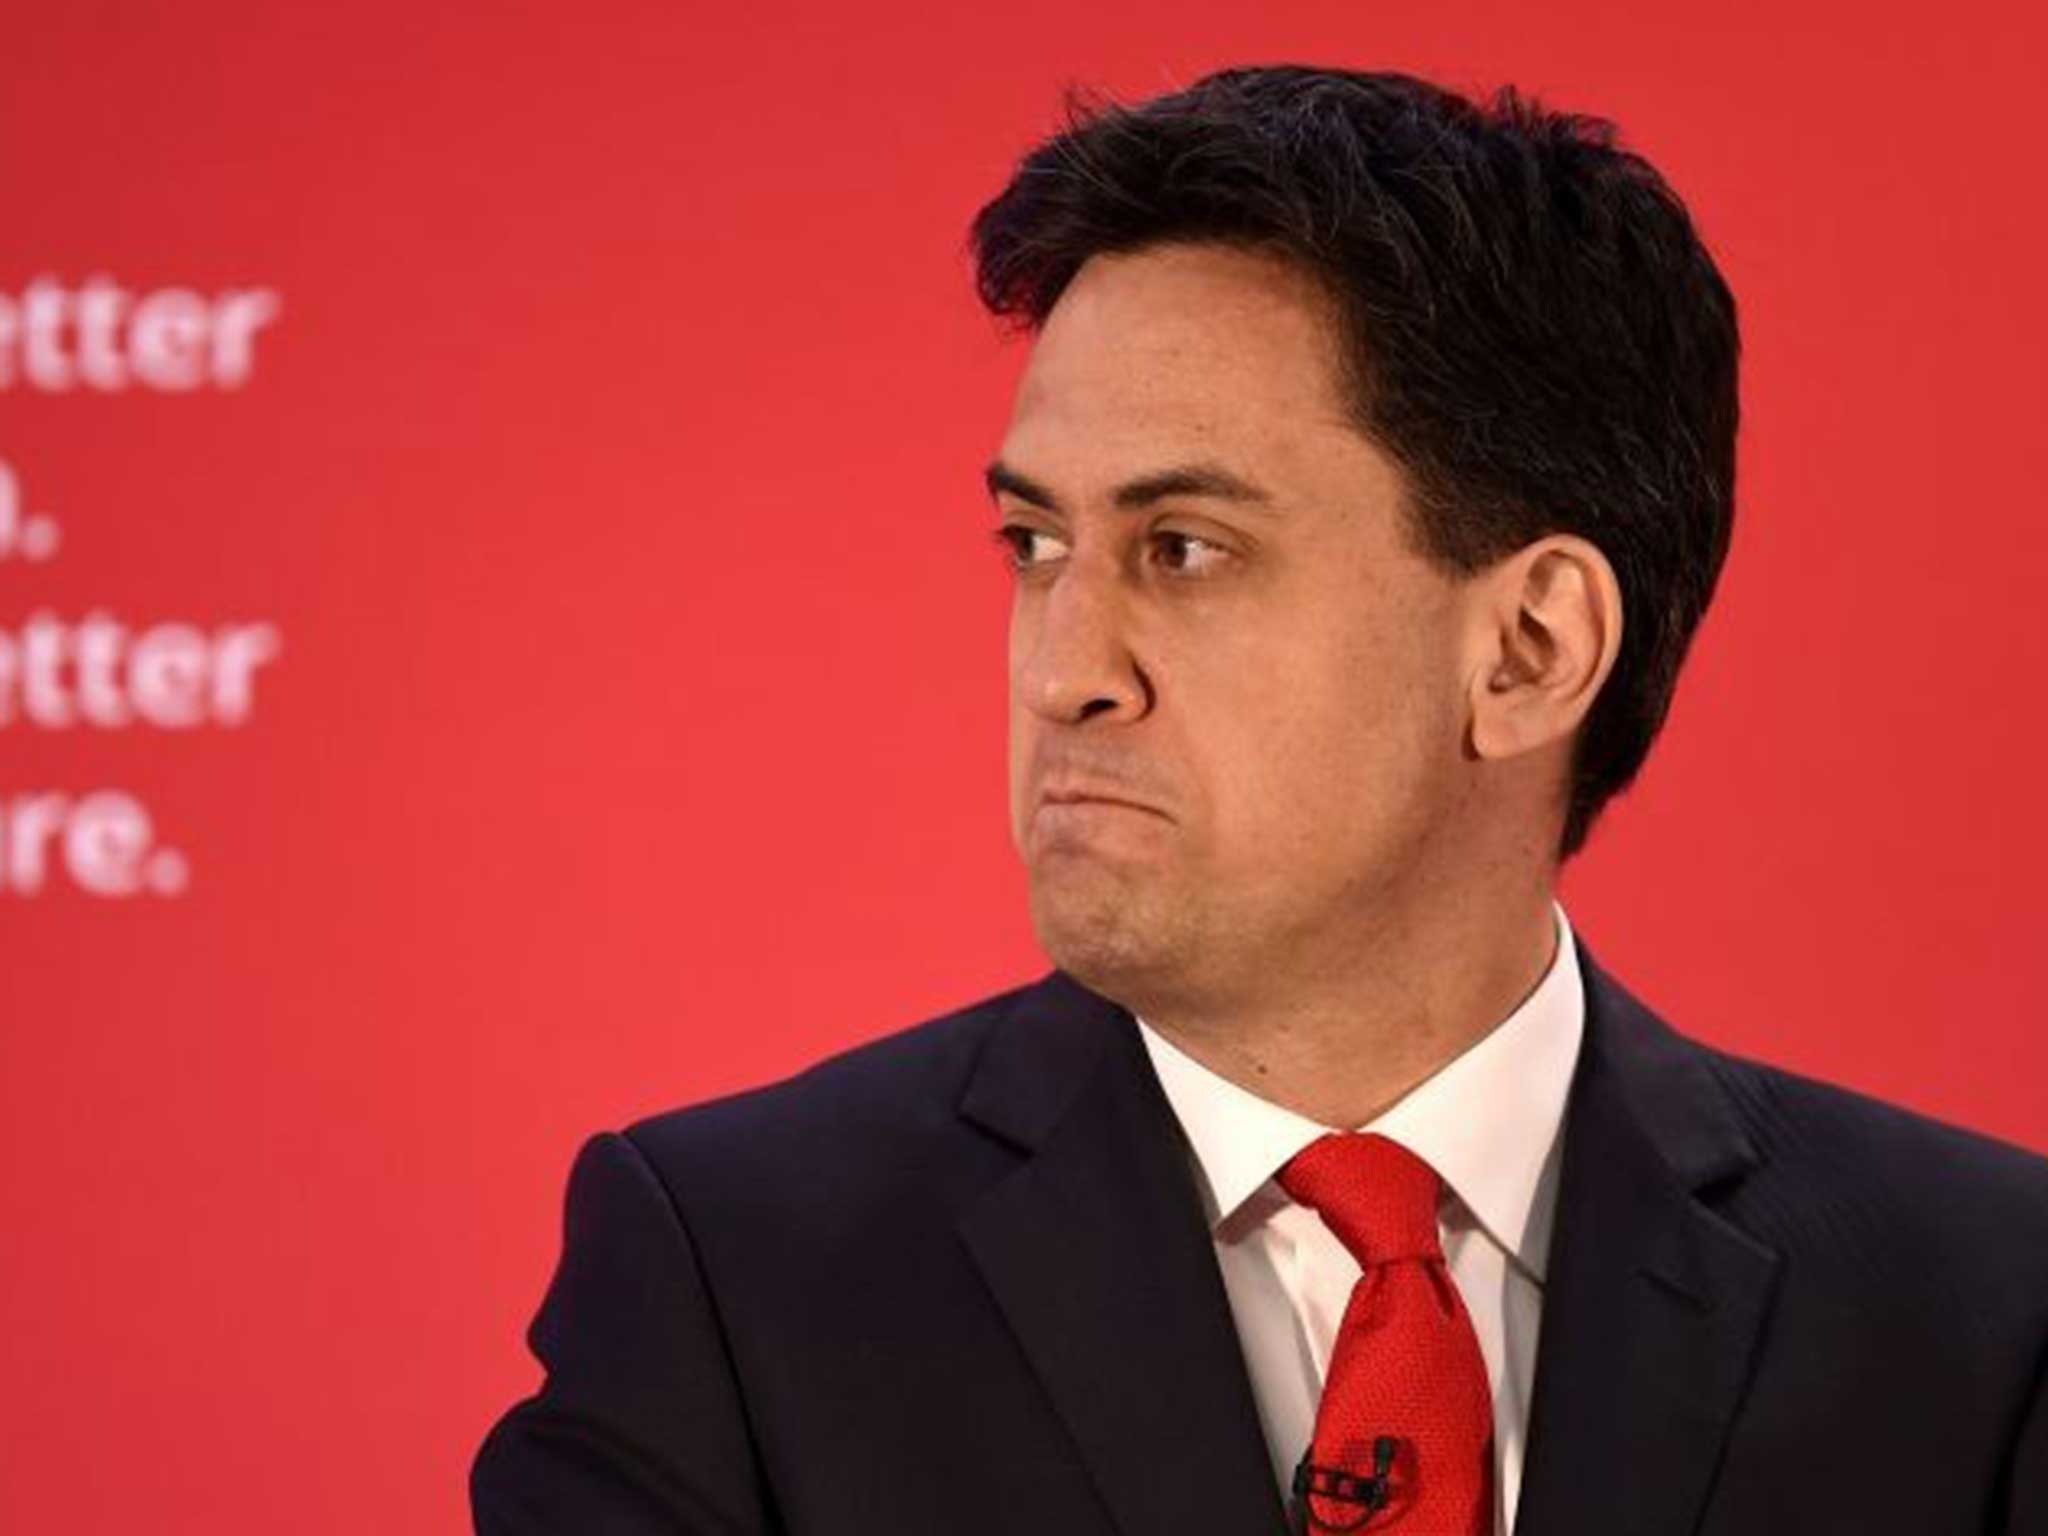 Miliband was mistaken for Nick Clegg in Holborn